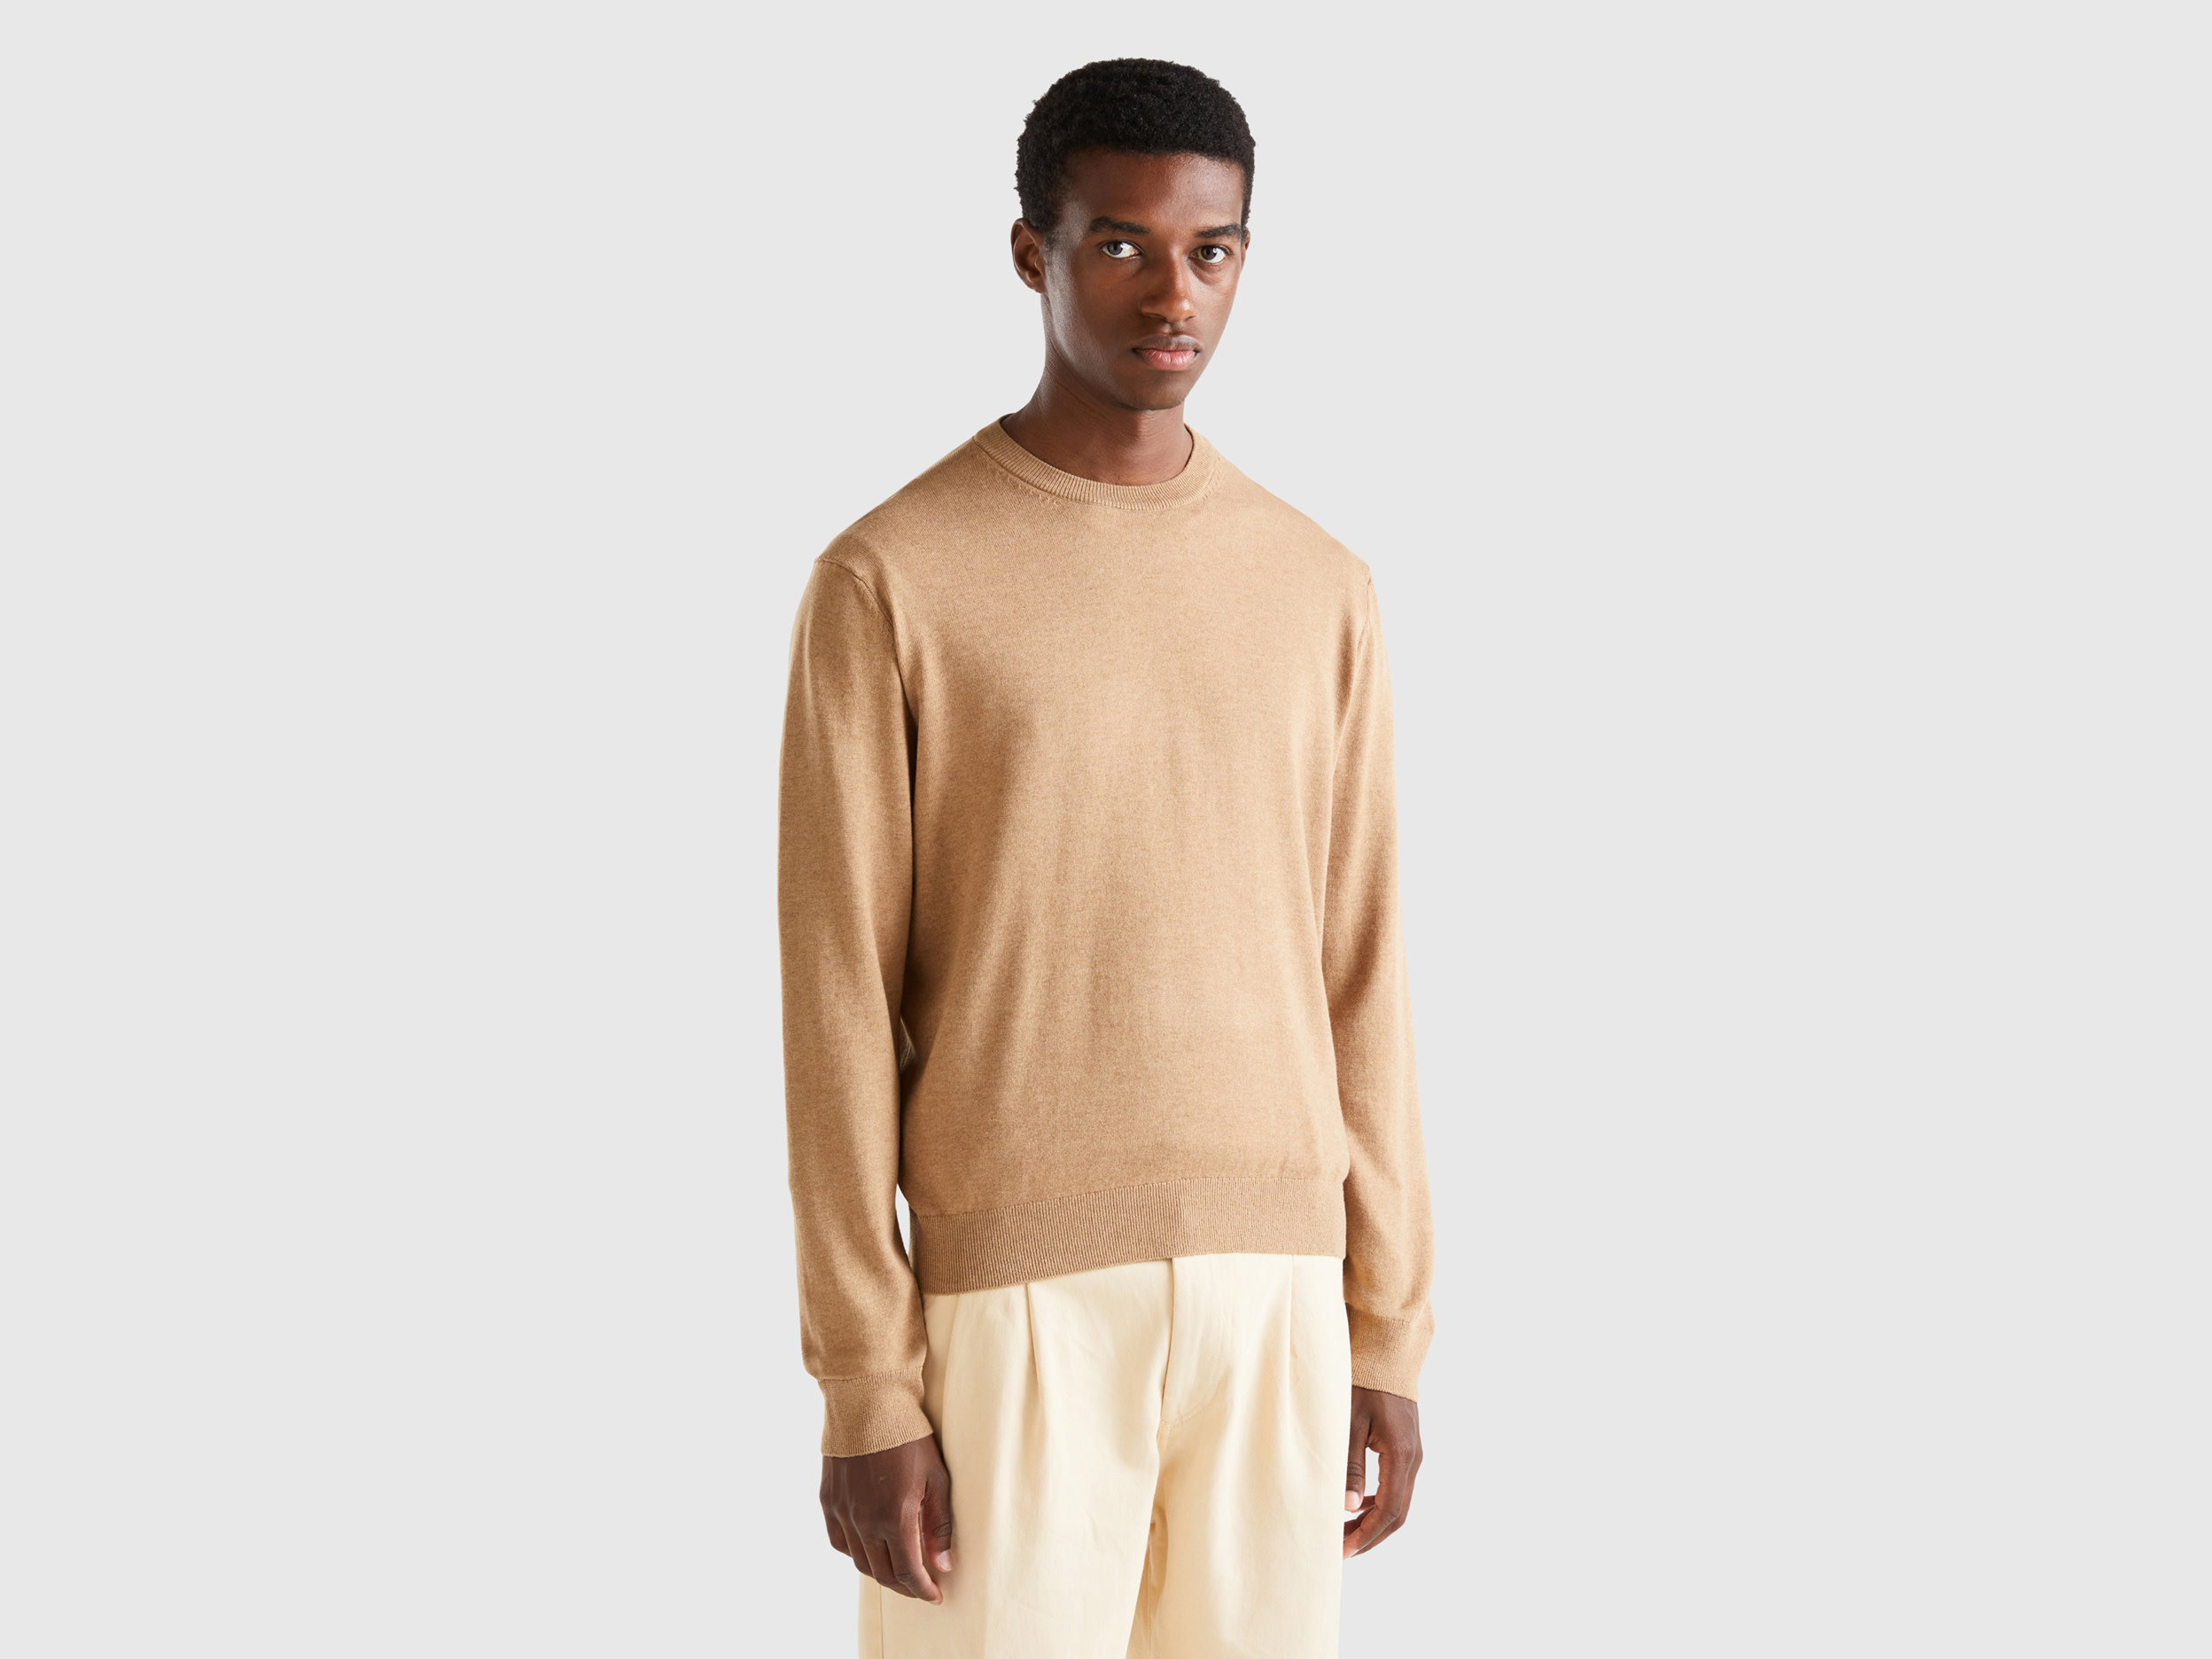 Benetton, Cotton And Wool Crew Neck Sweater, size XS, Camel, Men